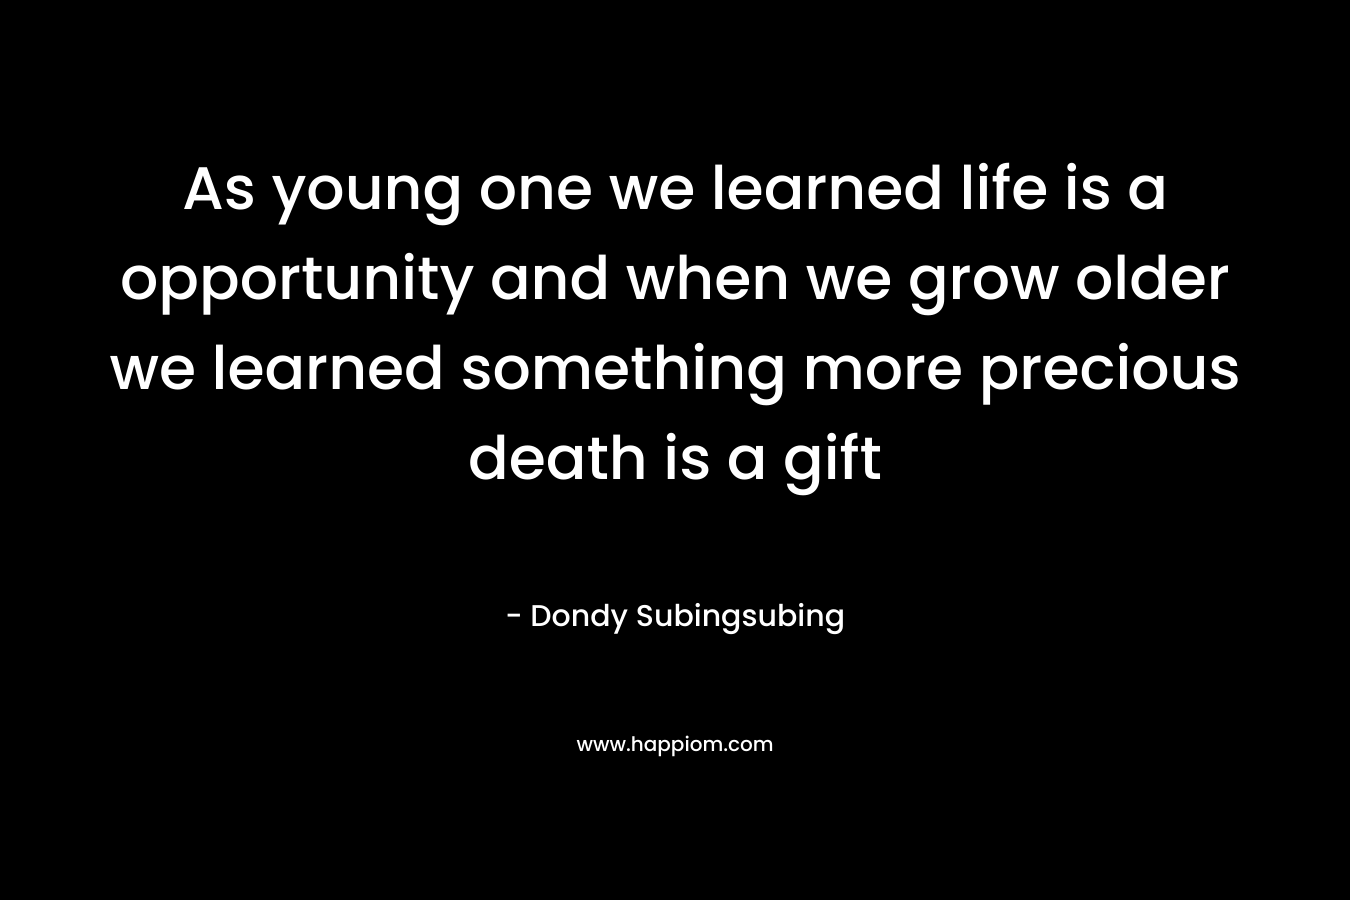 As young one we learned life is a opportunity and when we grow older we learned something more precious death is a gift – Dondy Subingsubing